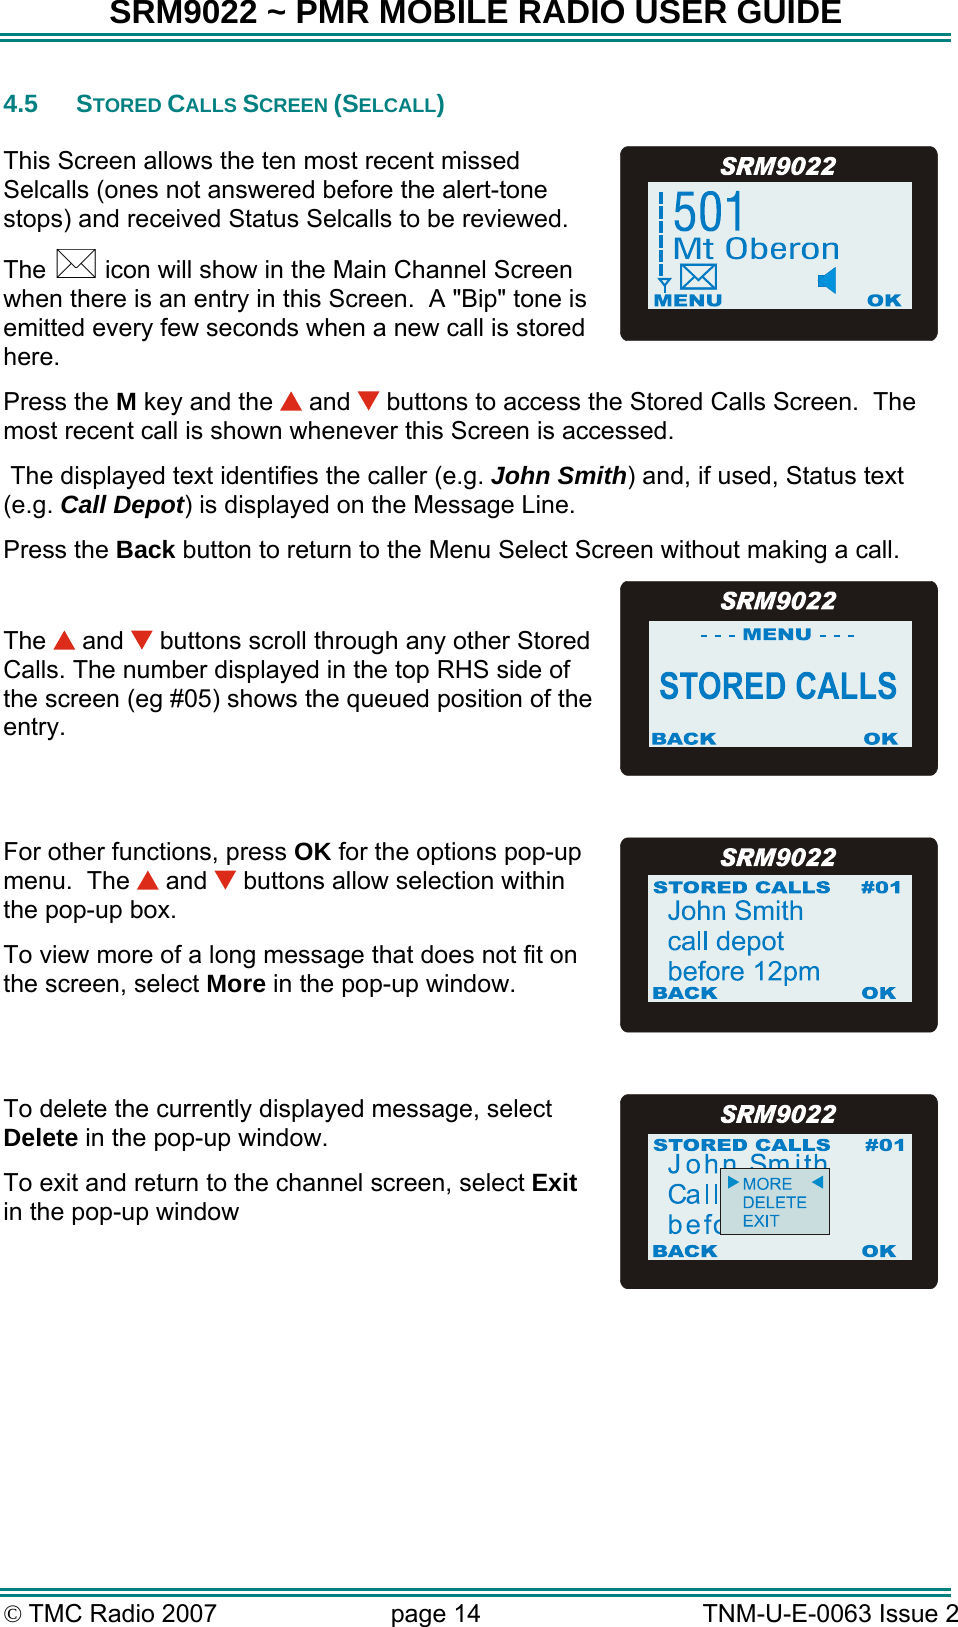 SRM9022 ~ PMR MOBILE RADIO USER GUIDE © TMC Radio 2007  page 14   TNM-U-E-0063 Issue 2 4.5 STORED CALLS SCREEN (SELCALL)  This Screen allows the ten most recent missed Selcalls (ones not answered before the alert-tone stops) and received Status Selcalls to be reviewed.  The   icon will show in the Main Channel Screen when there is an entry in this Screen.  A &quot;Bip&quot; tone is emitted every few seconds when a new call is stored here.   Press the M key and the   and   buttons to access the Stored Calls Screen.  The most recent call is shown whenever this Screen is accessed.  The displayed text identifies the caller (e.g. John Smith) and, if used, Status text (e.g. Call Depot) is displayed on the Message Line. Press the Back button to return to the Menu Select Screen without making a call.  The   and   buttons scroll through any other Stored Calls. The number displayed in the top RHS side of the screen (eg #05) shows the queued position of the entry.  For other functions, press OK for the options pop-up menu.  The   and   buttons allow selection within the pop-up box. To view more of a long message that does not fit on the screen, select More in the pop-up window.  To delete the currently displayed message, select Delete in the pop-up window. To exit and return to the channel screen, select Exit in the pop-up window      